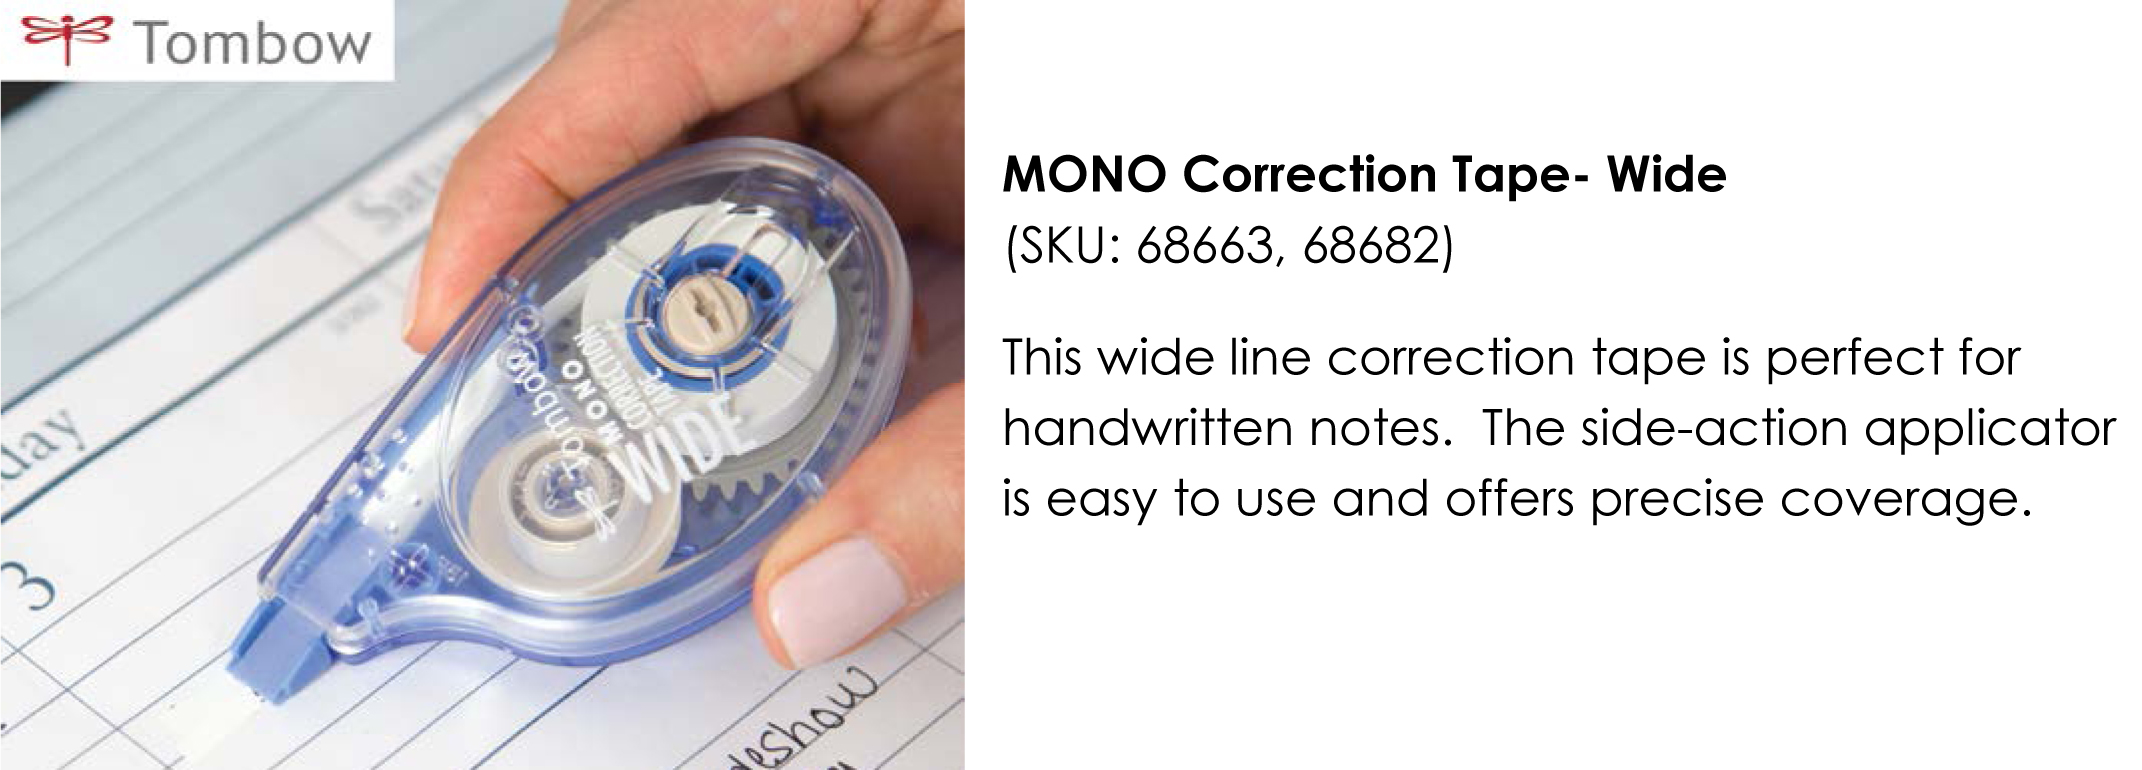 Tombow WideTrac Correction Tape (68615)